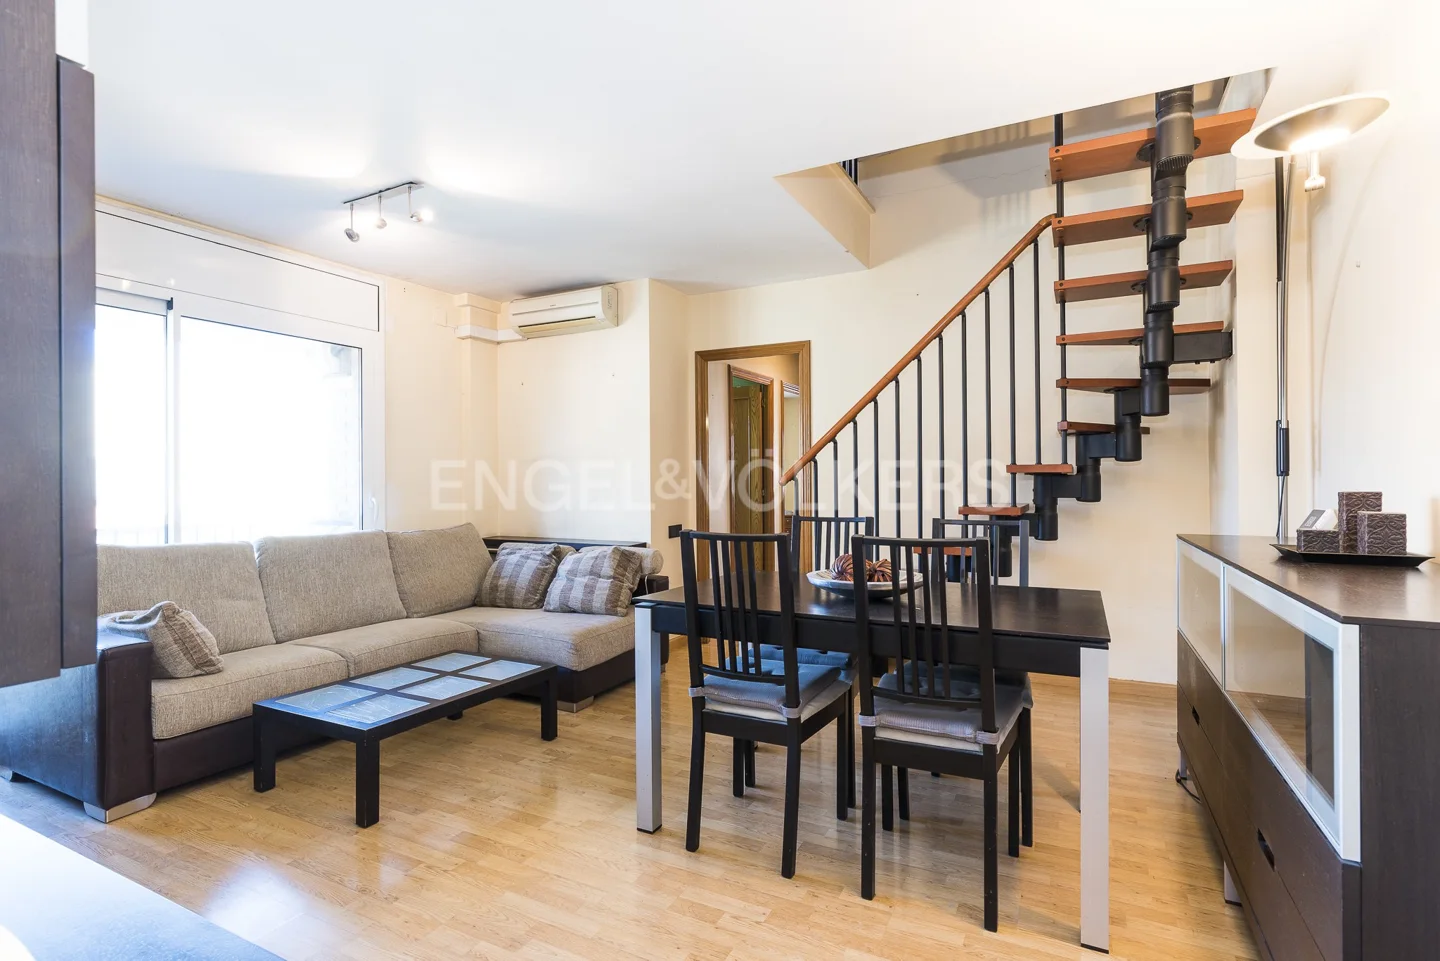 Great apartment strategically located next to the center of Terrassa.